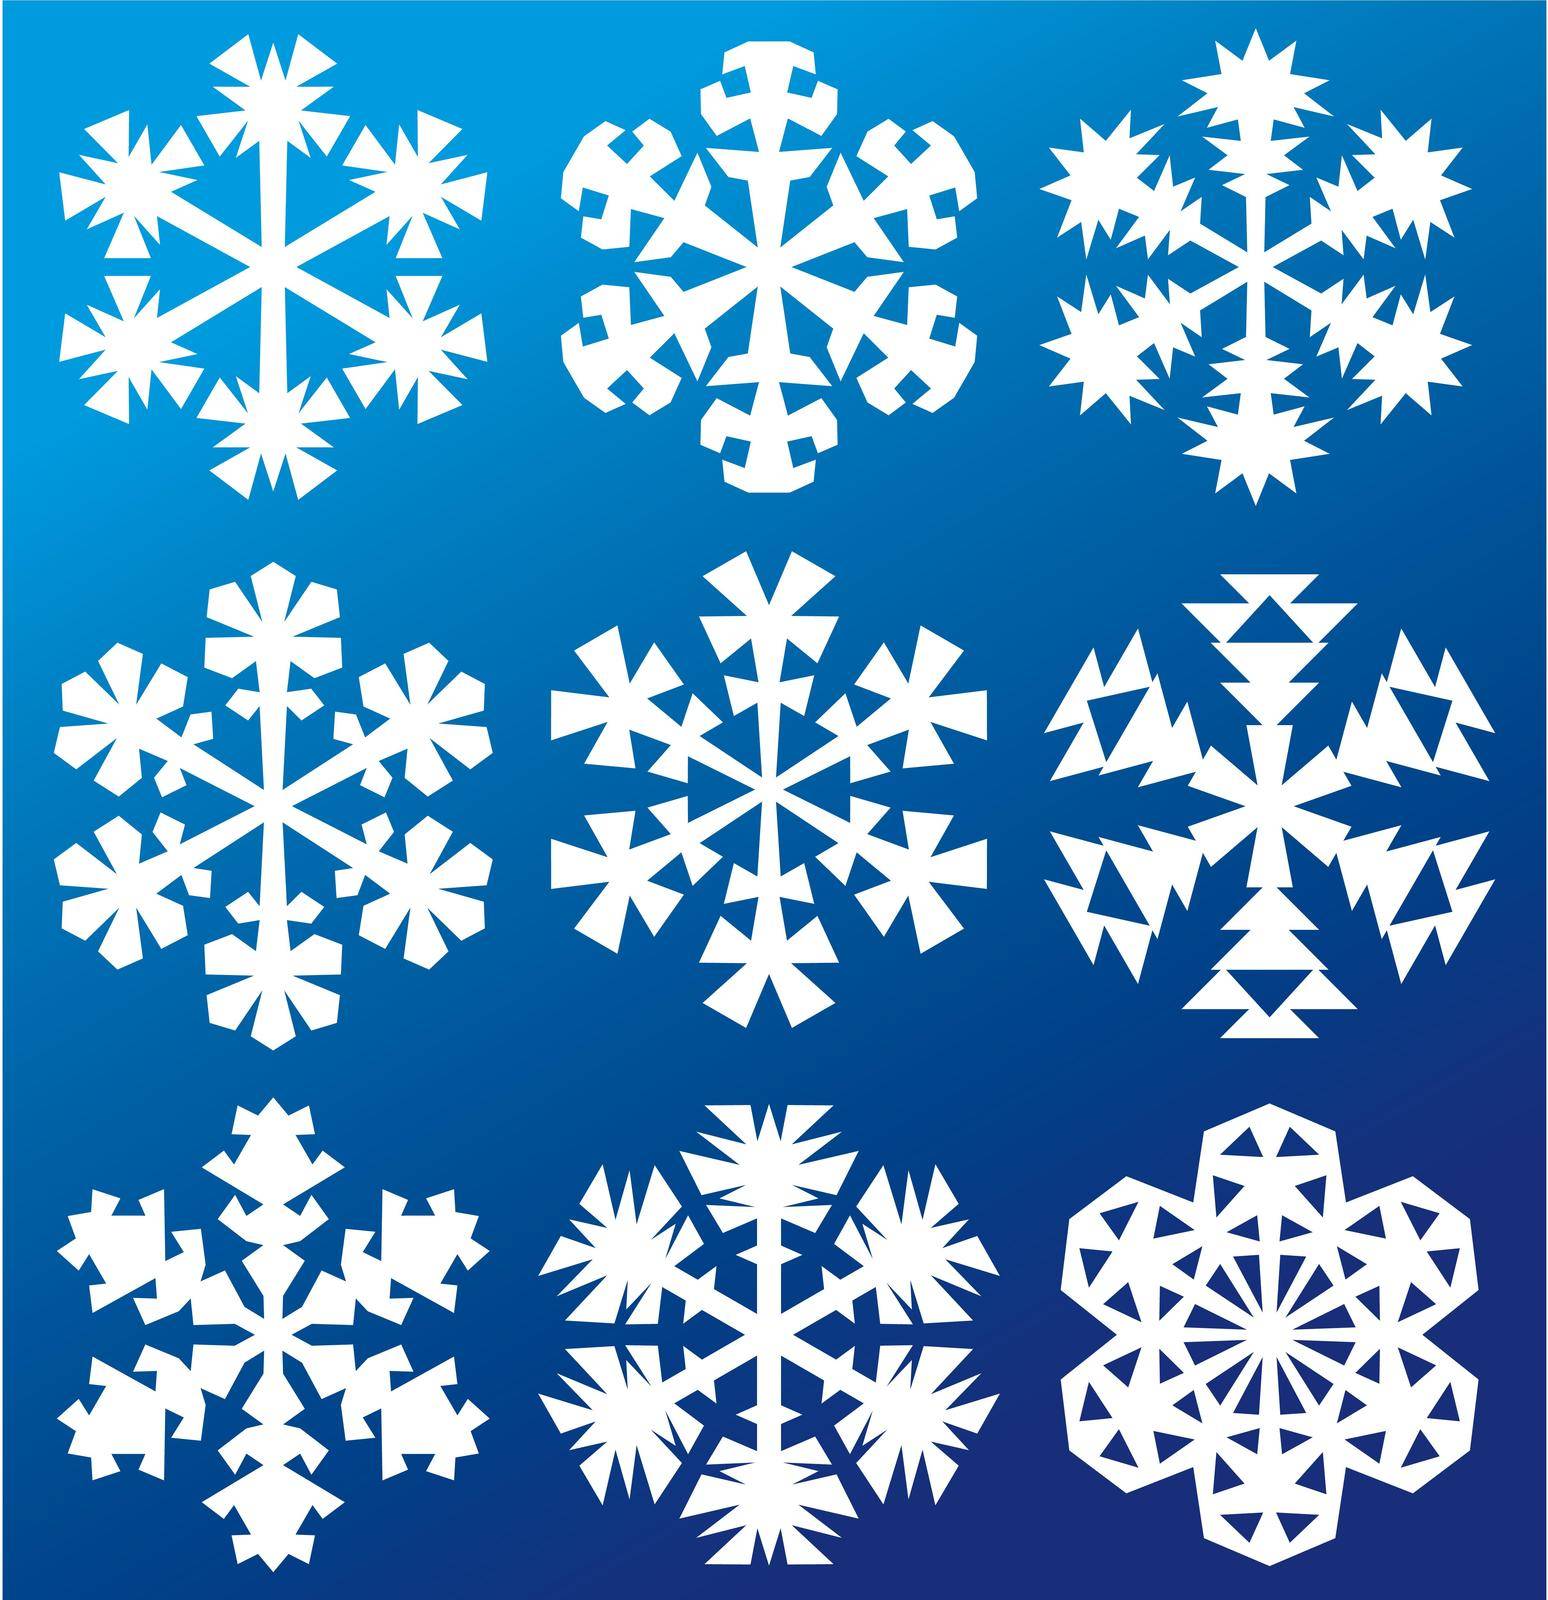 Collection of snowflakes vector illustration